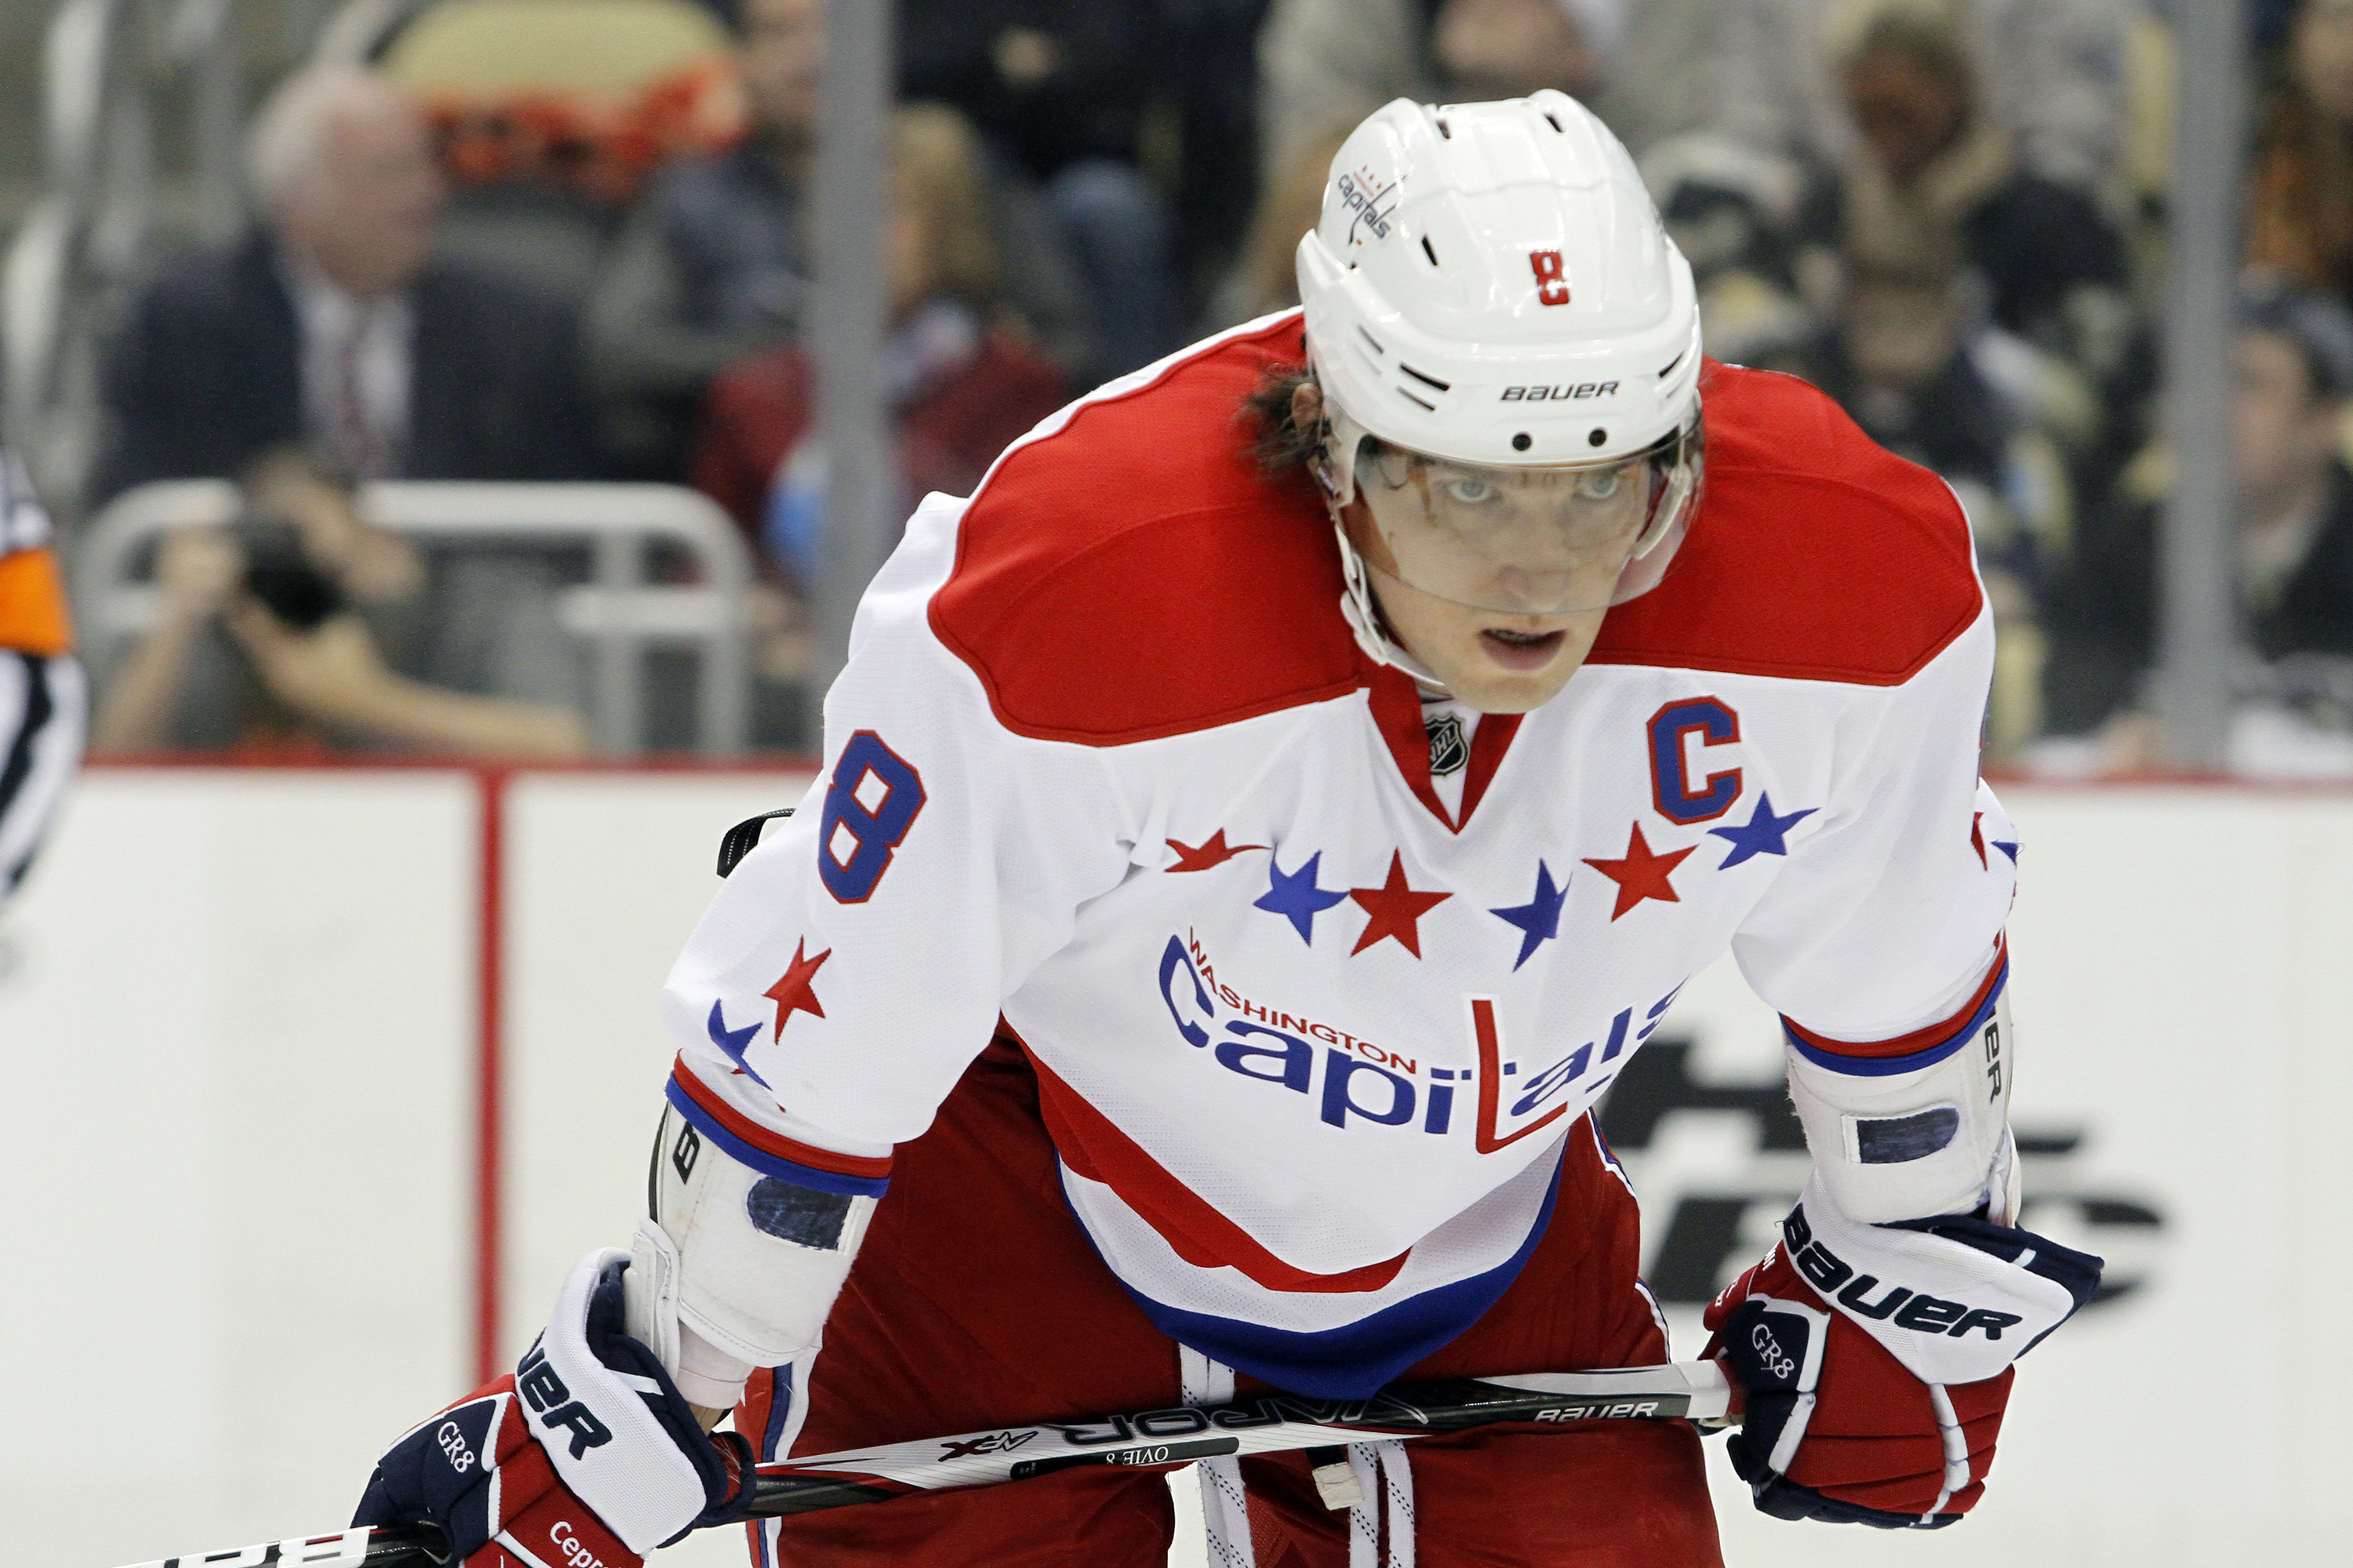 Alex Ovechkin pulls out of NHL All-Star game: 'I got suspended, so